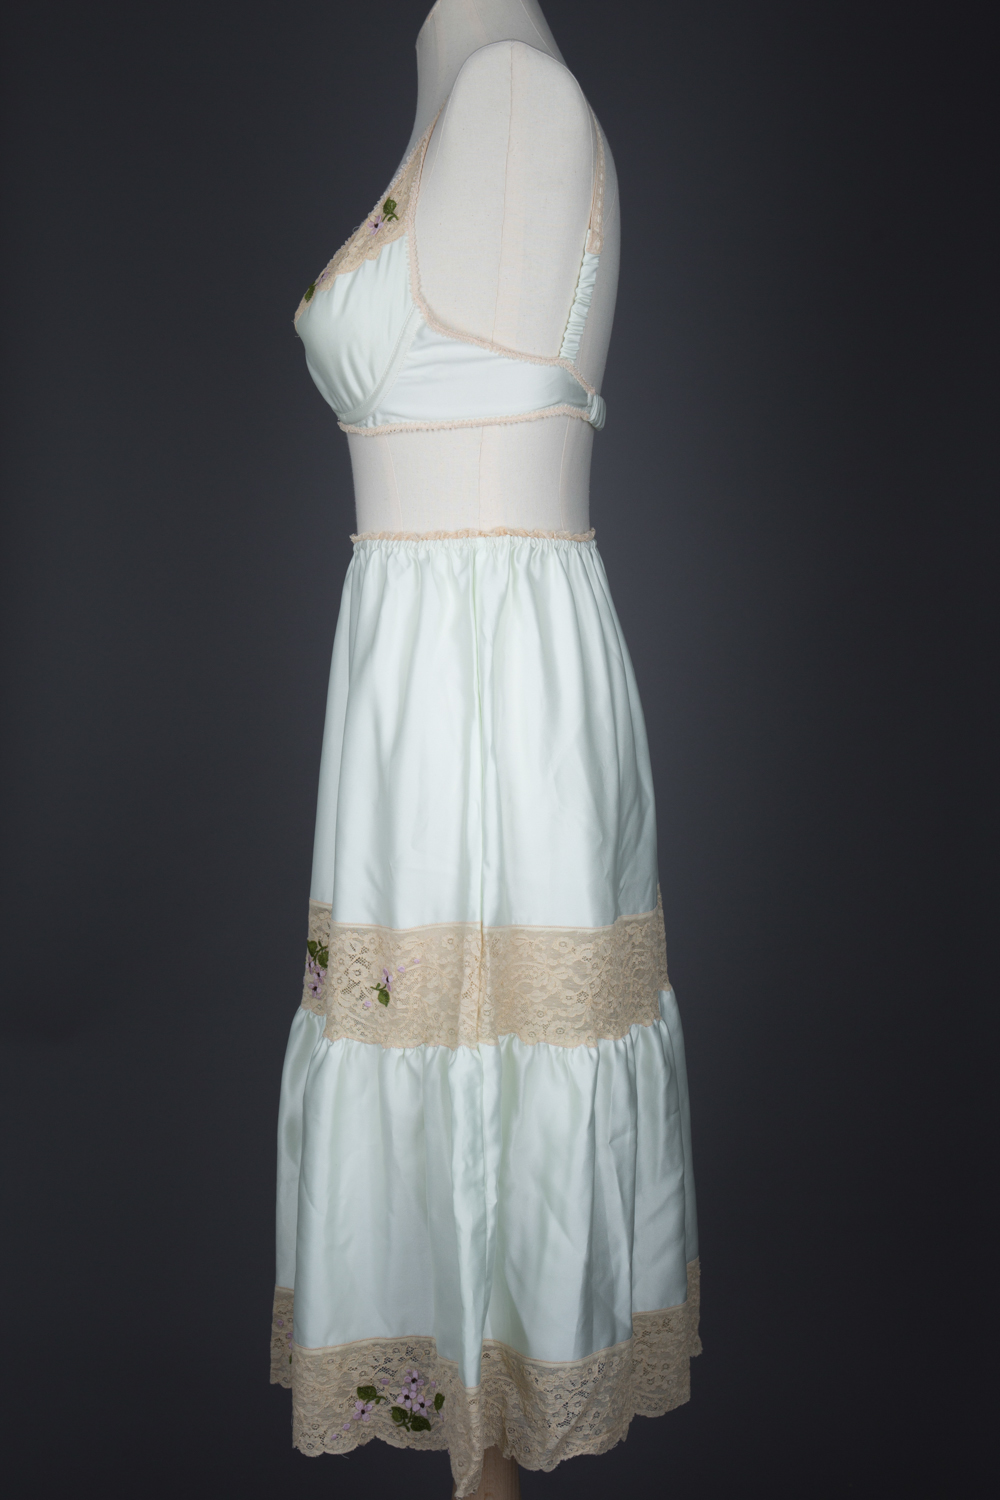 Embroidered Lace & Polyester Satin Bra & Half Slip Set By Janet Reger, c. 1970s, Great Britain. The Underpinnings Museum. Photography by Tigz Rice.